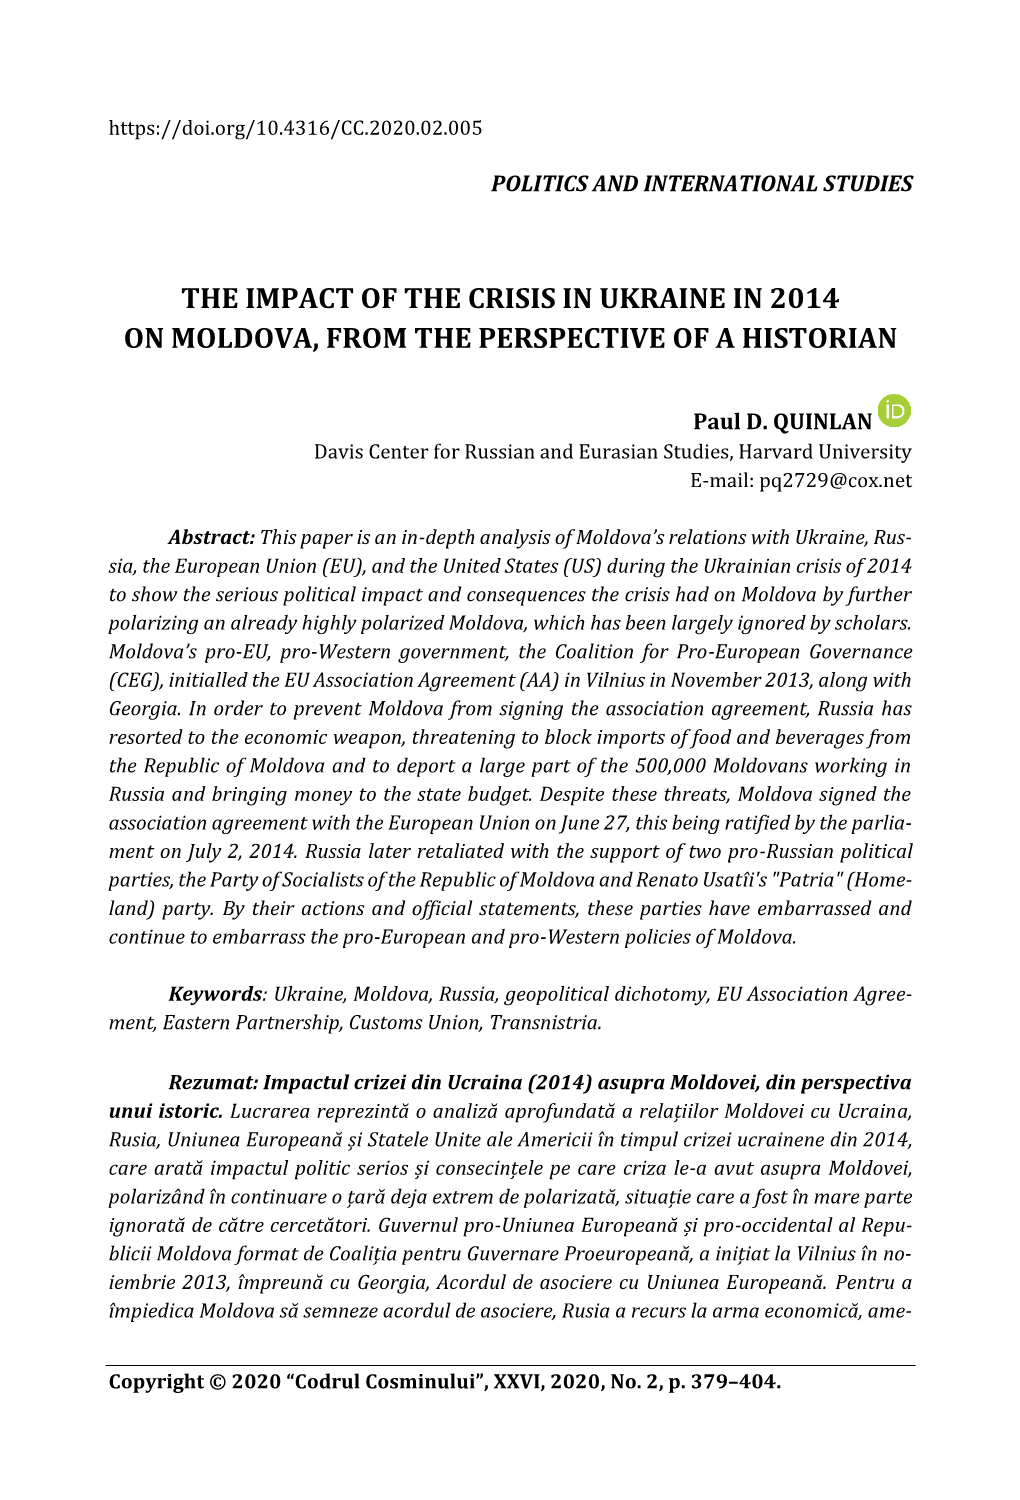 The Impact of the Crisis in Ukraine in 2014 on Moldova, from the Perspective of a Historian